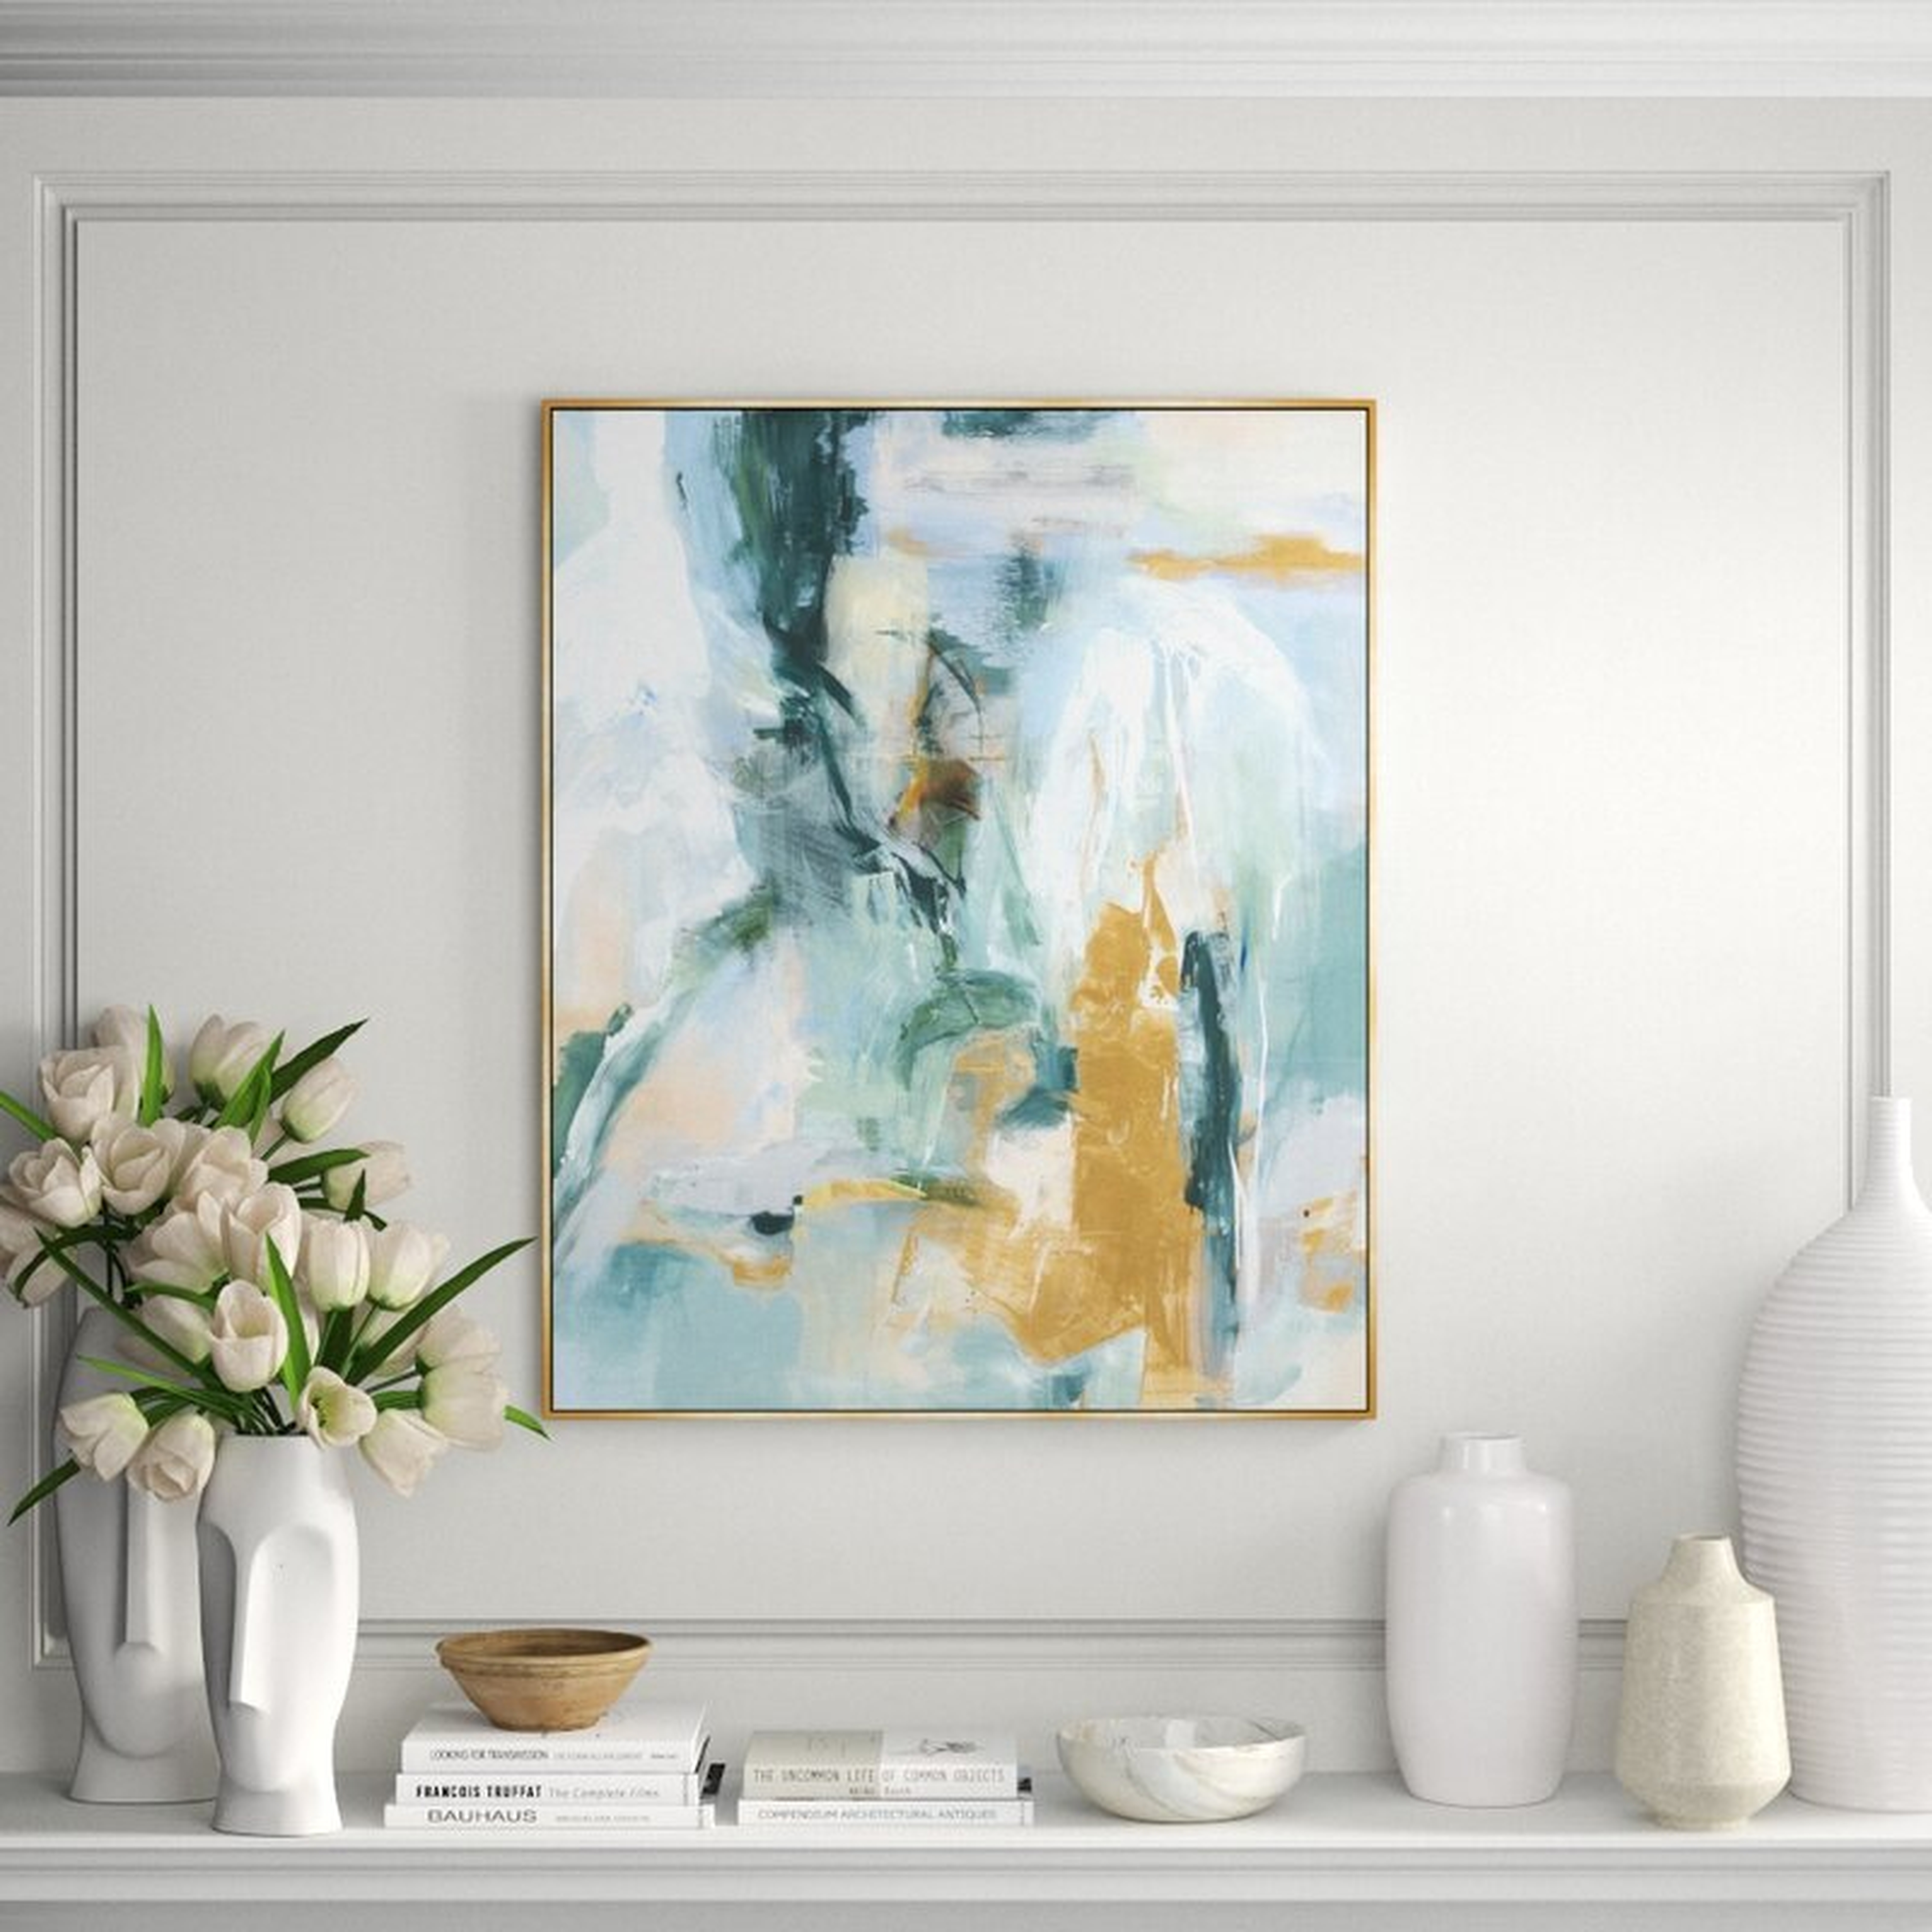 Chelsea Art Studio 'Quiet Water' By Giselle Kelly - Picture Frame Painting Print on Canvas Size: 38.5" H x 31.5" W x 1.5" D - Perigold